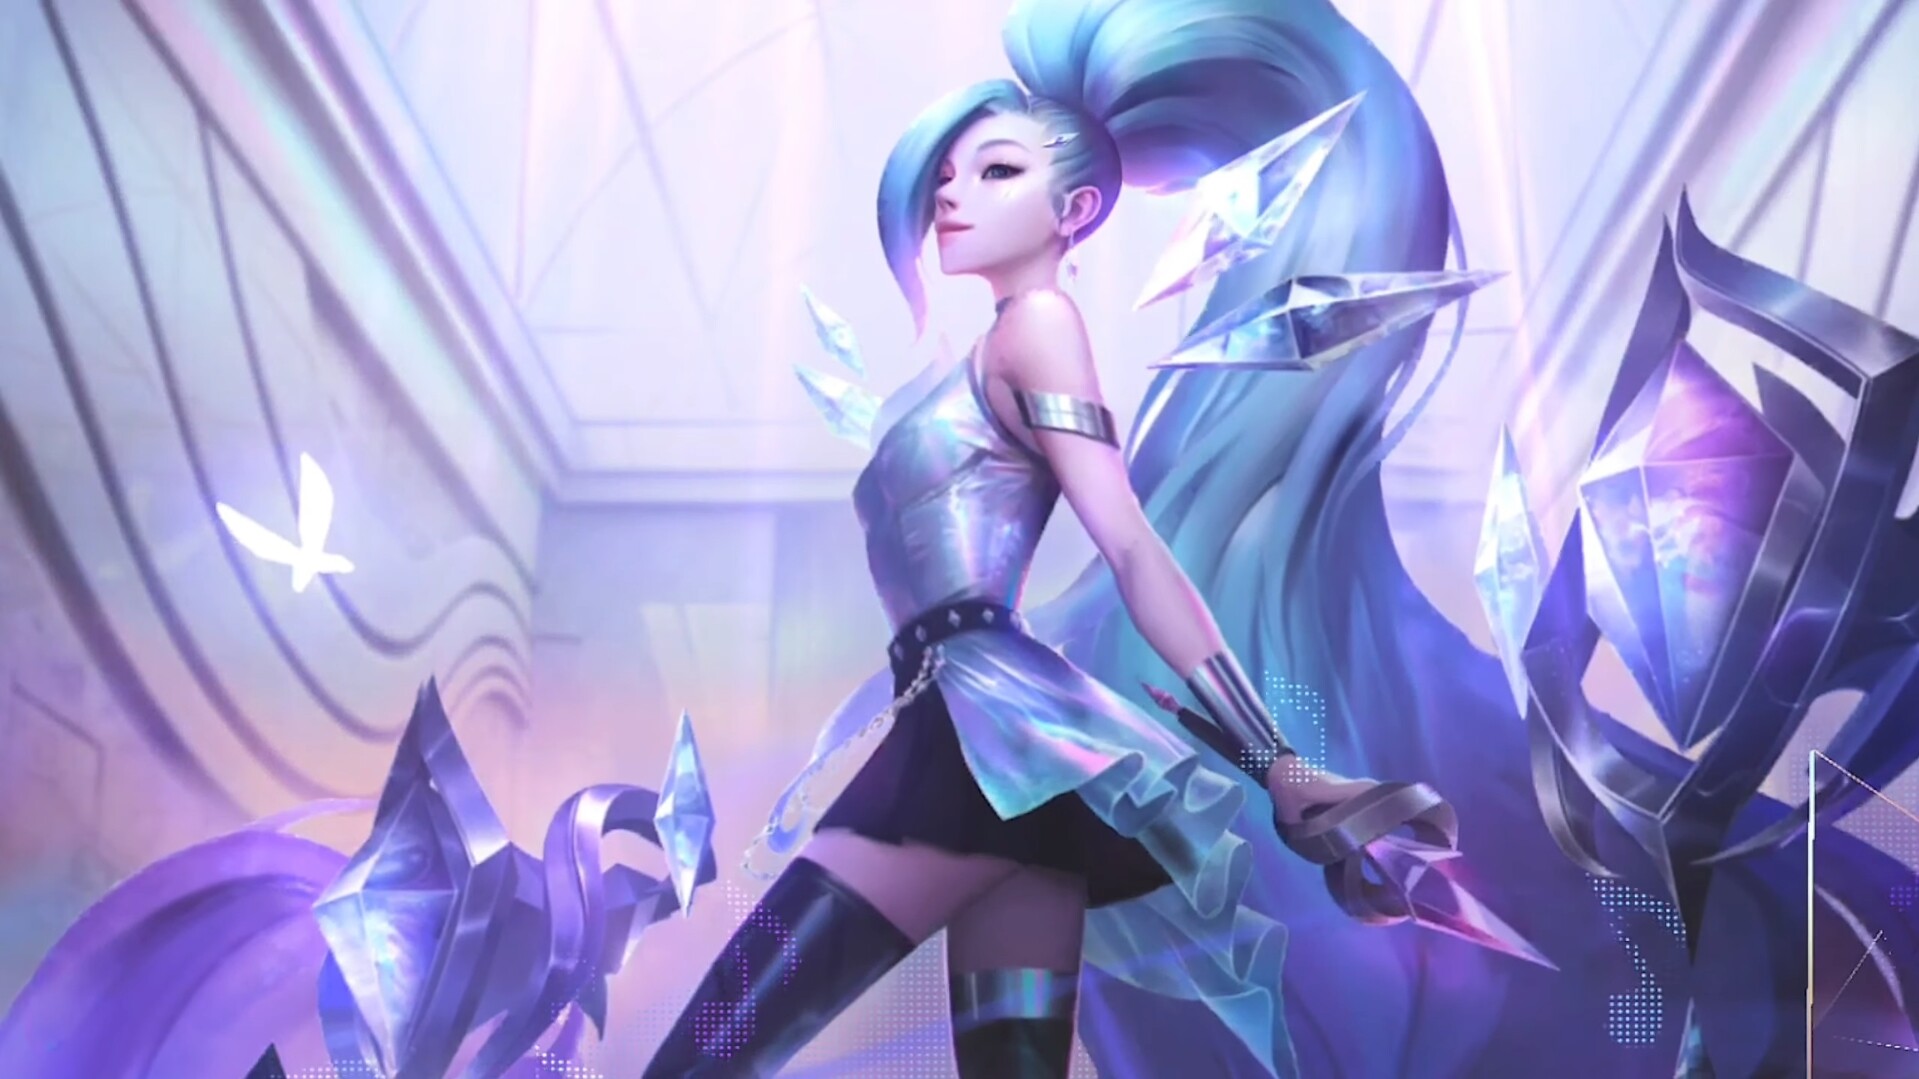 ArtStation - KDA All Out Seraphine League of Legends Live Wallpaper